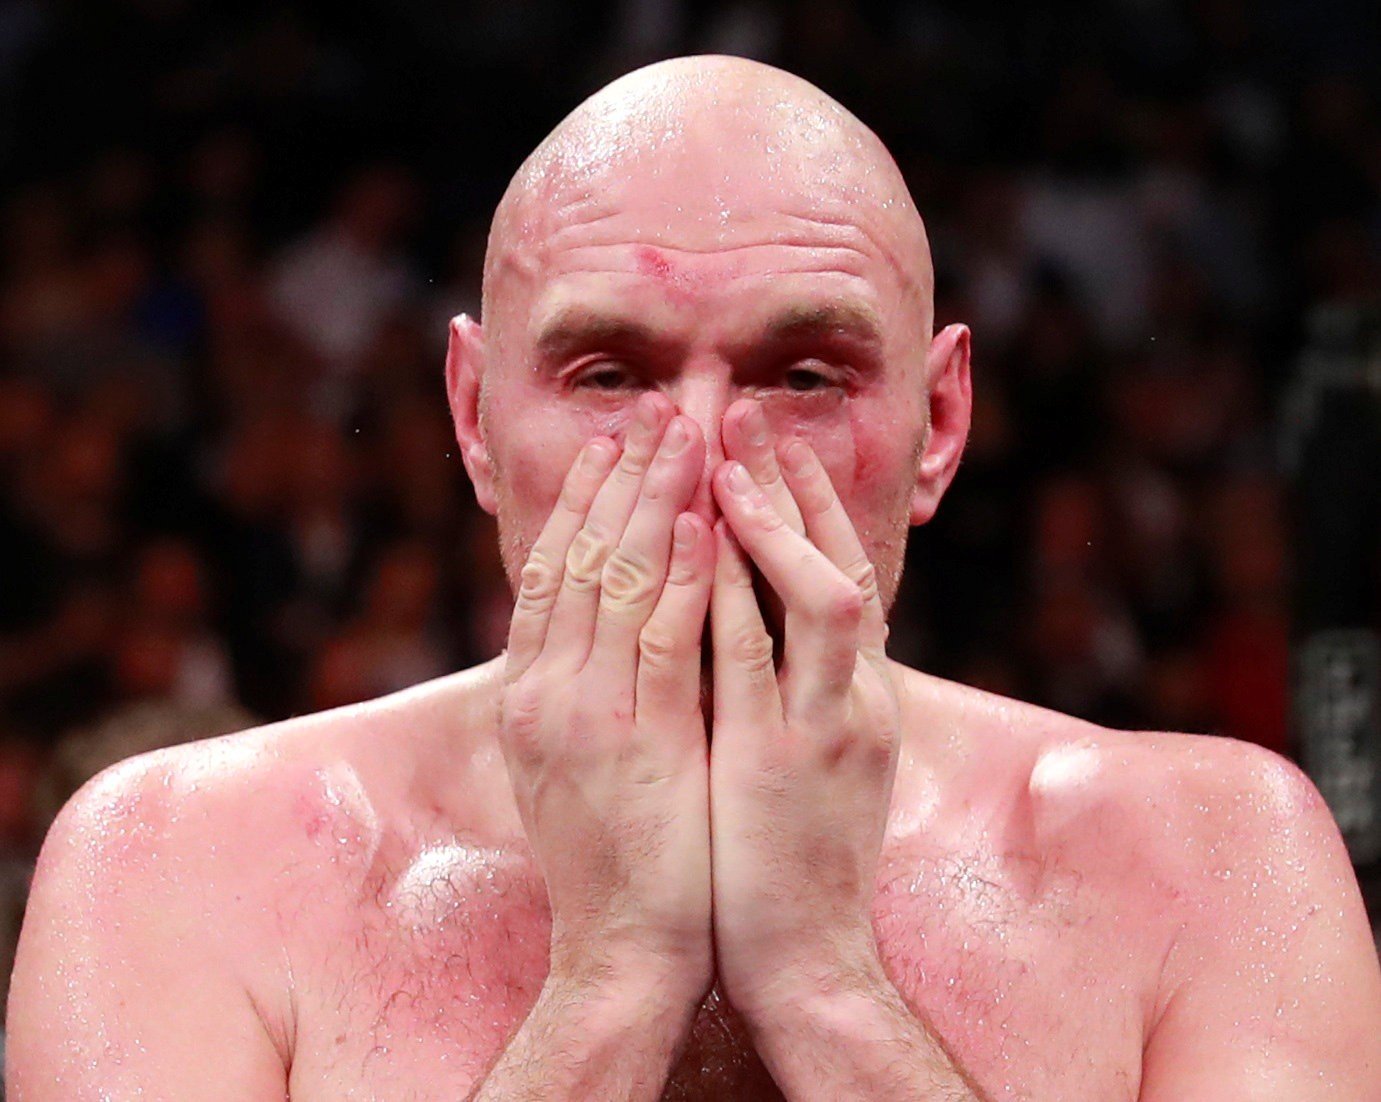 Tyson Fury after his fight with Deontay Wilder. Photo: Reuters